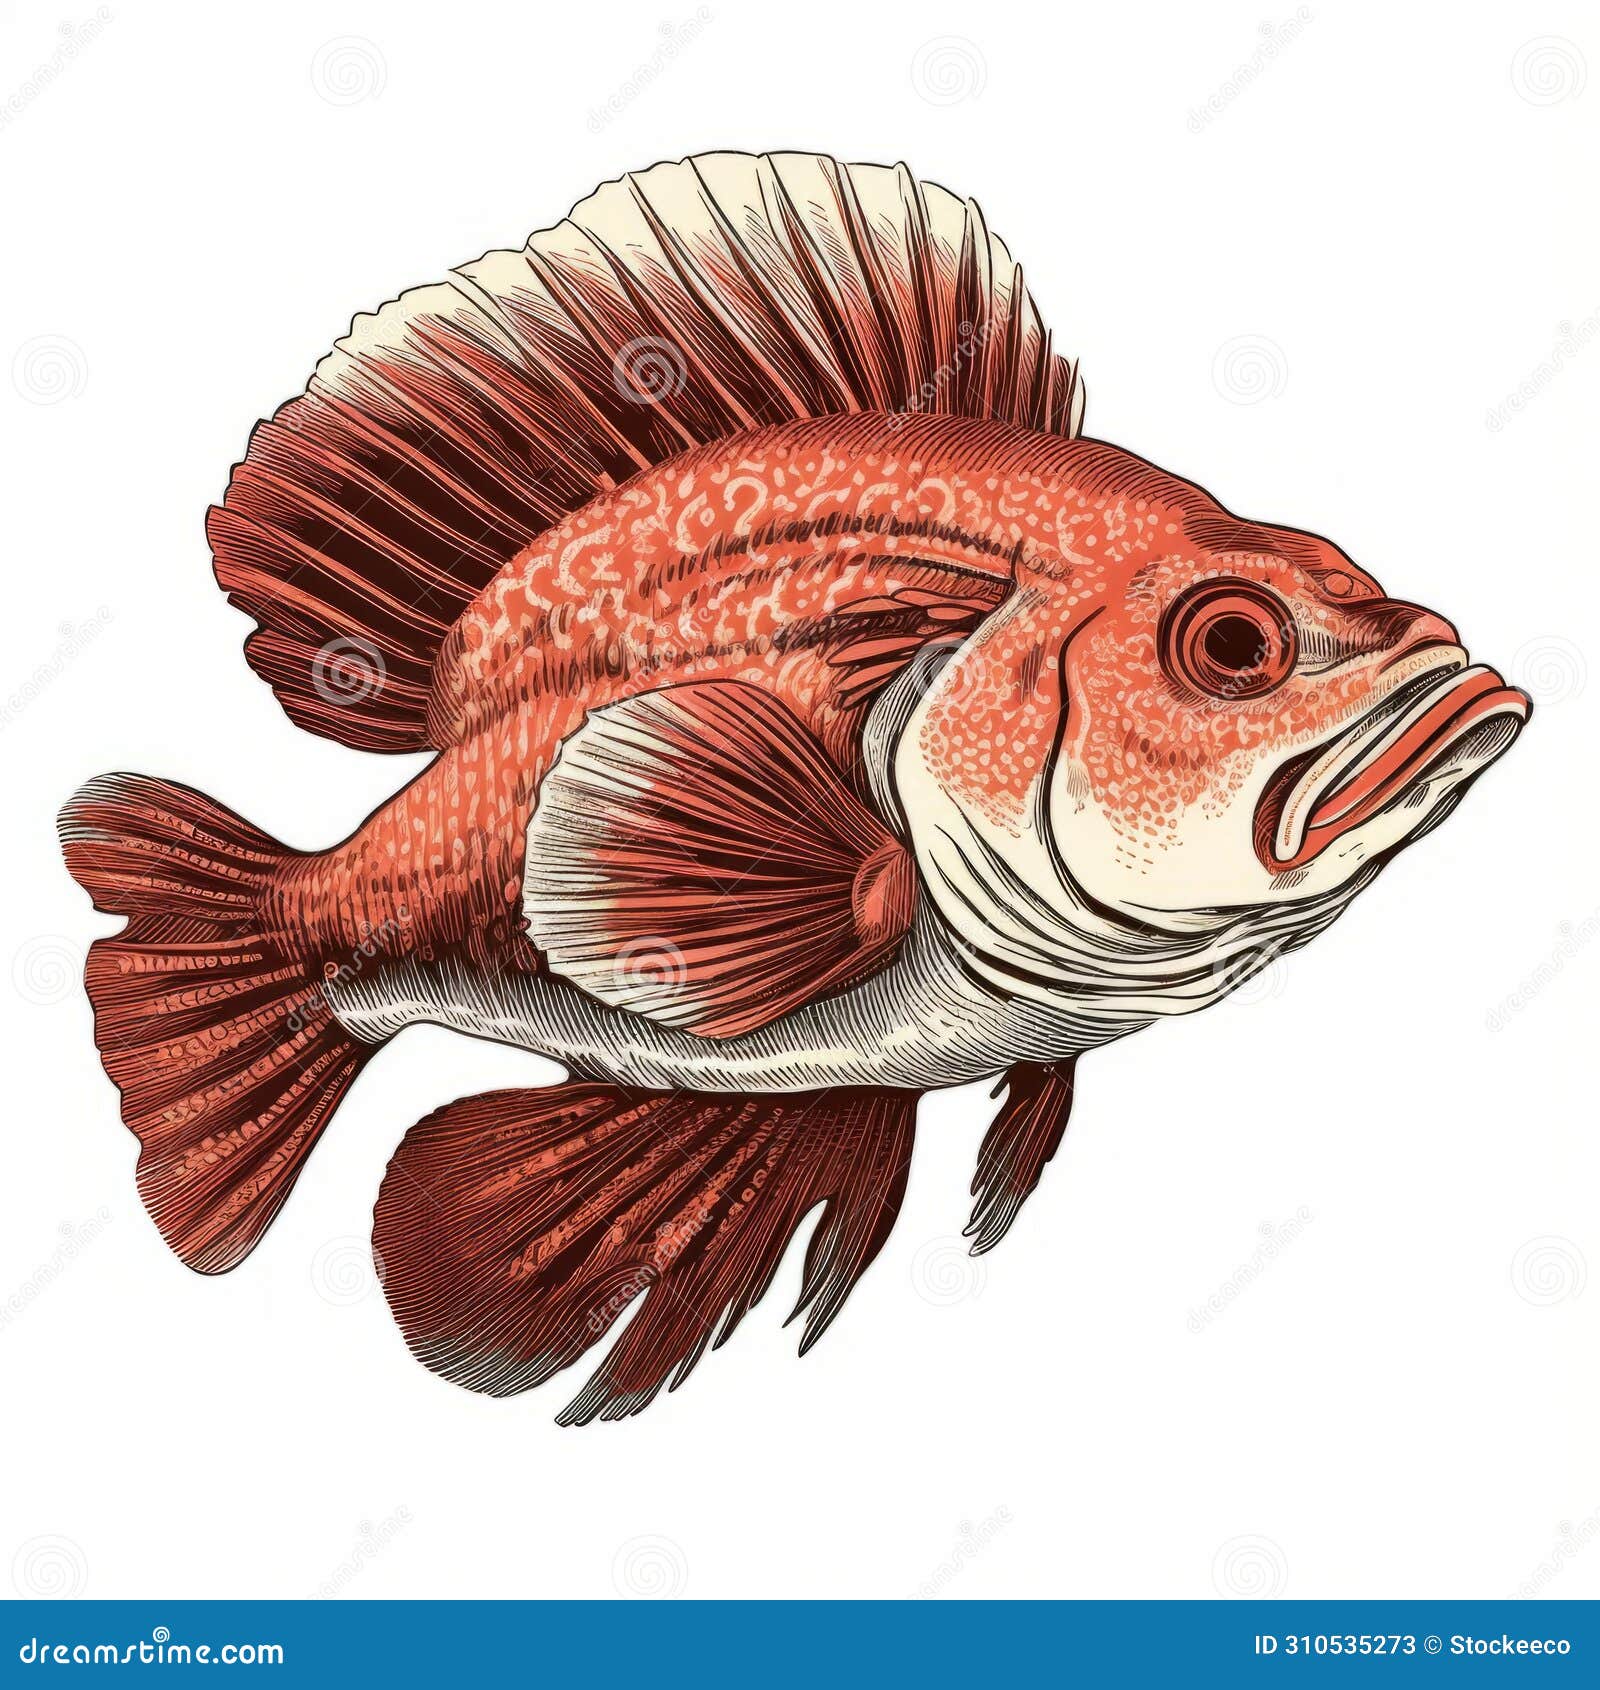 vintage style  of a red fish on white background